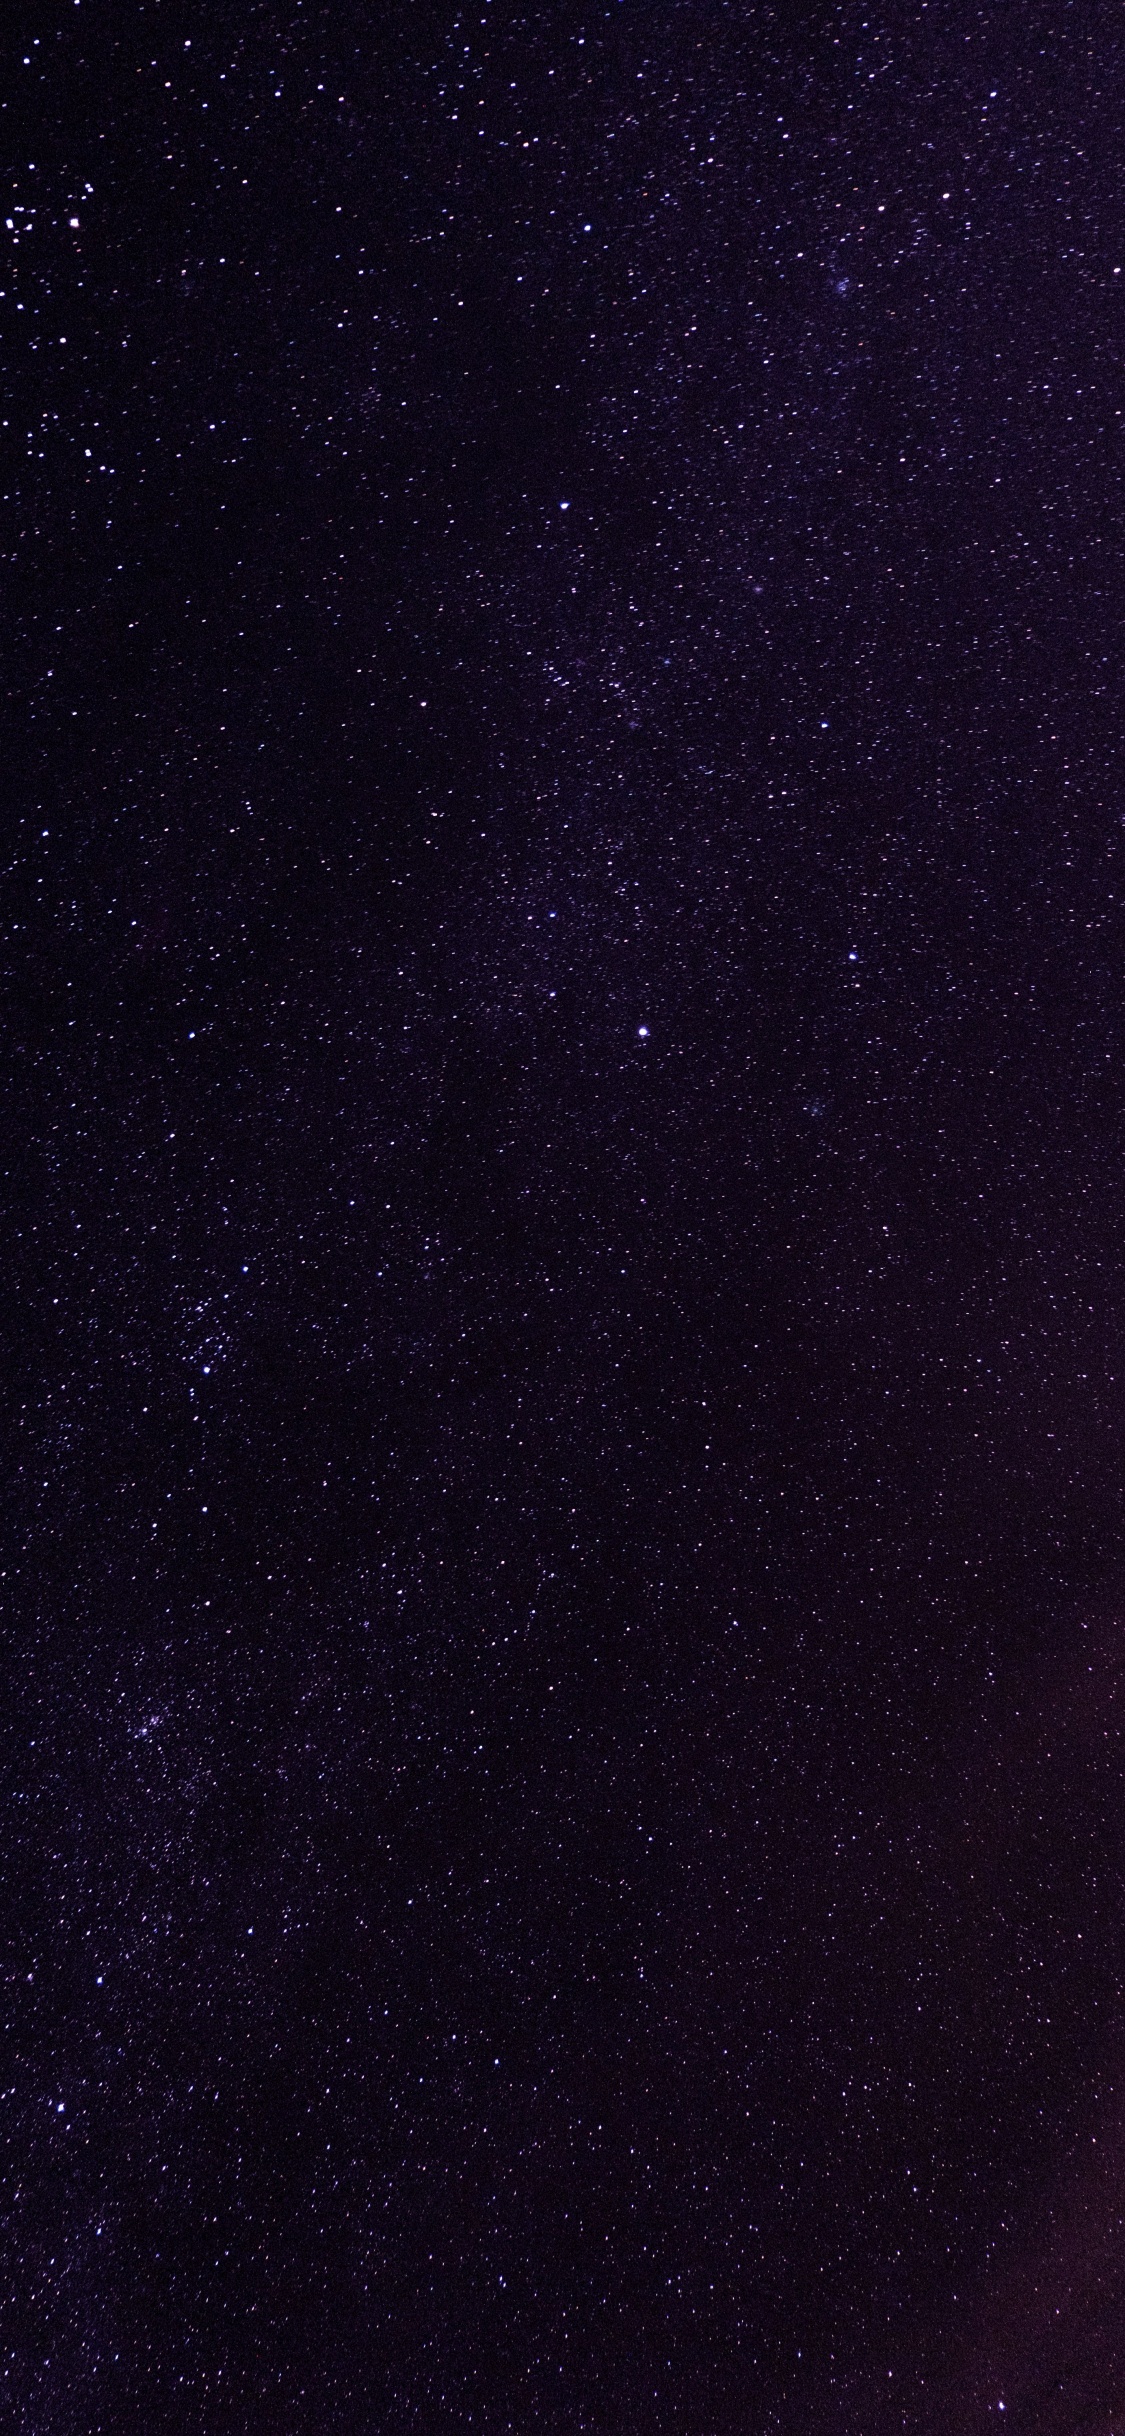 Starry Night Sky Over The Starry Night. Wallpaper in 1125x2436 Resolution